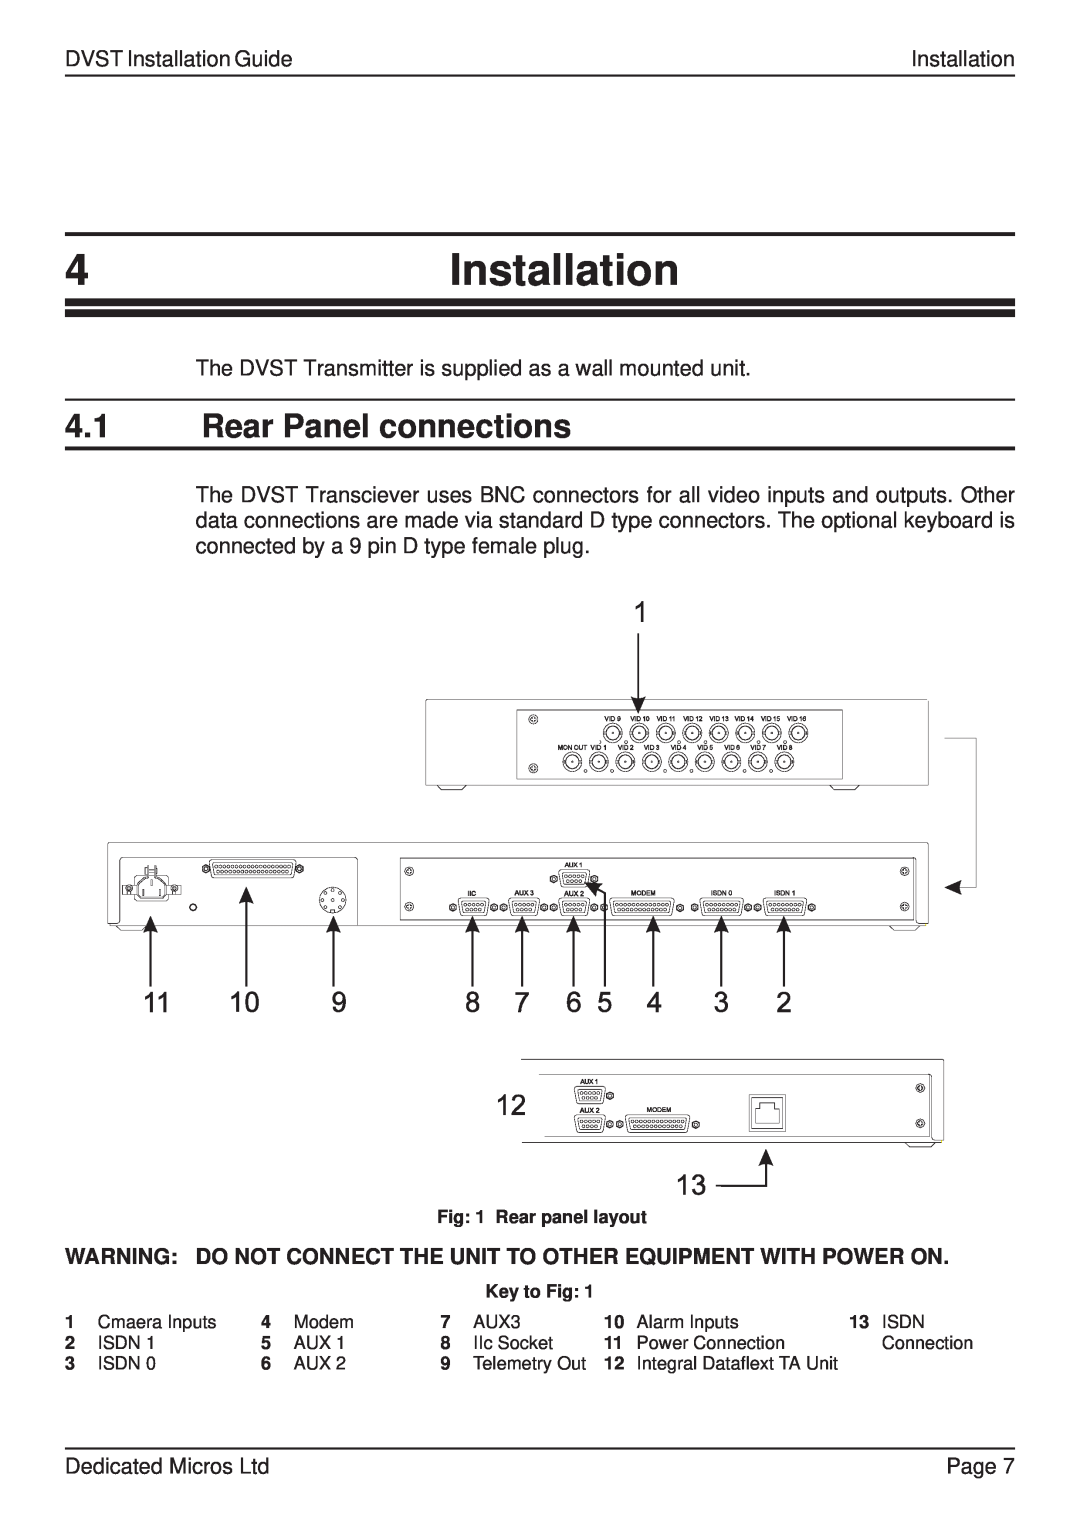 Guardian Technologies DFT 150/175, DVST manual 4Installation, 4.1Rear Panel connections 